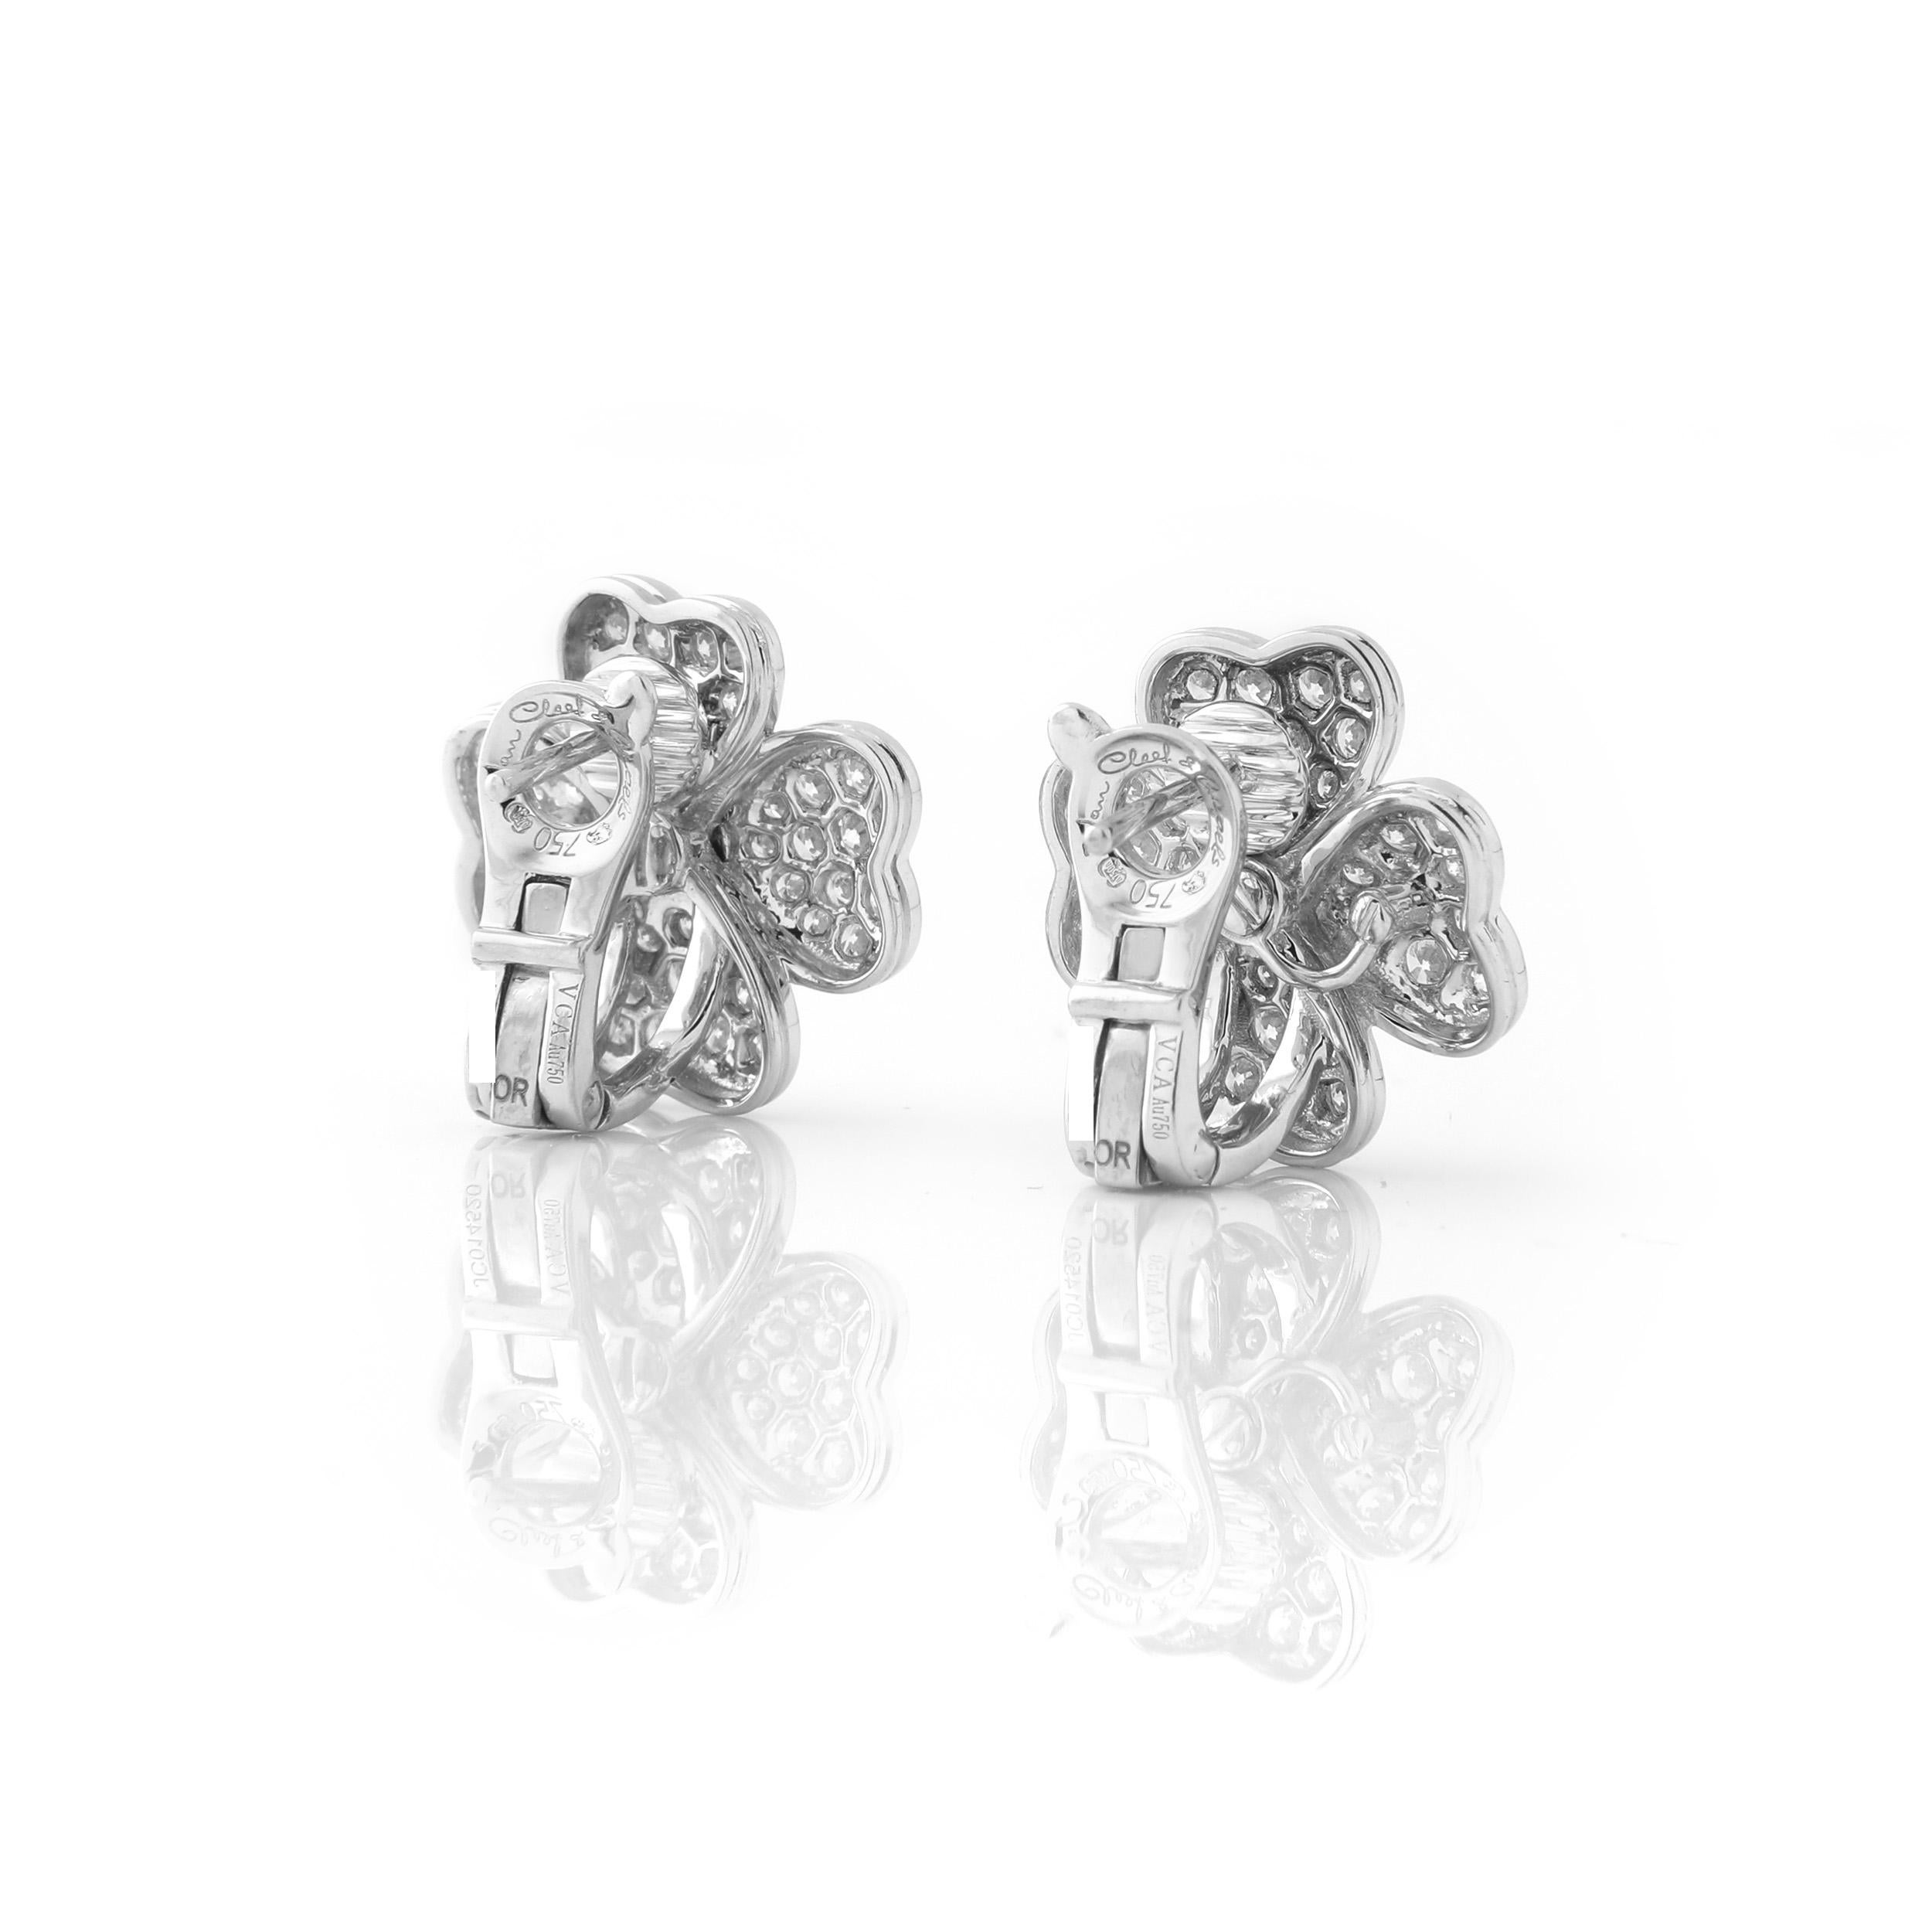 Van Cleef & Arpels 18k white gold and diamond “Cosmos” earrings with posts, small model. Signed Van Cleef & Arpels with serial number and french marks. In excellent condition with no signs of wear.

Accompanied by the Certificate of Authenticity and